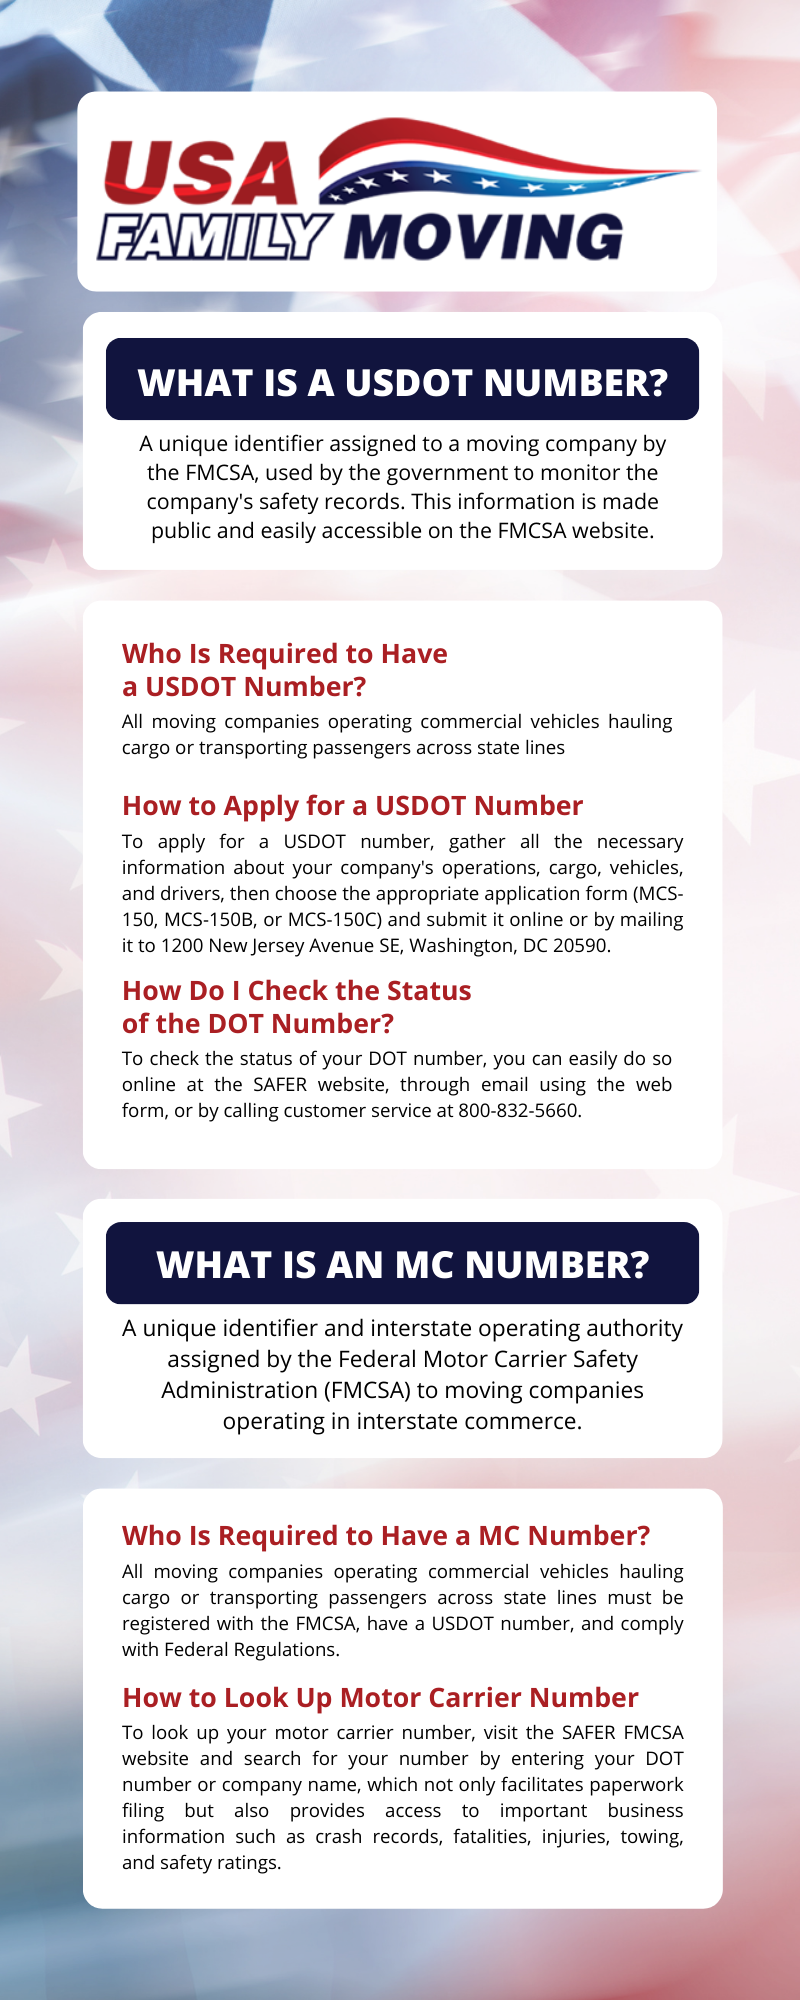 what-are-usdot-numbers-and-mc-numbers-usa-family-moving